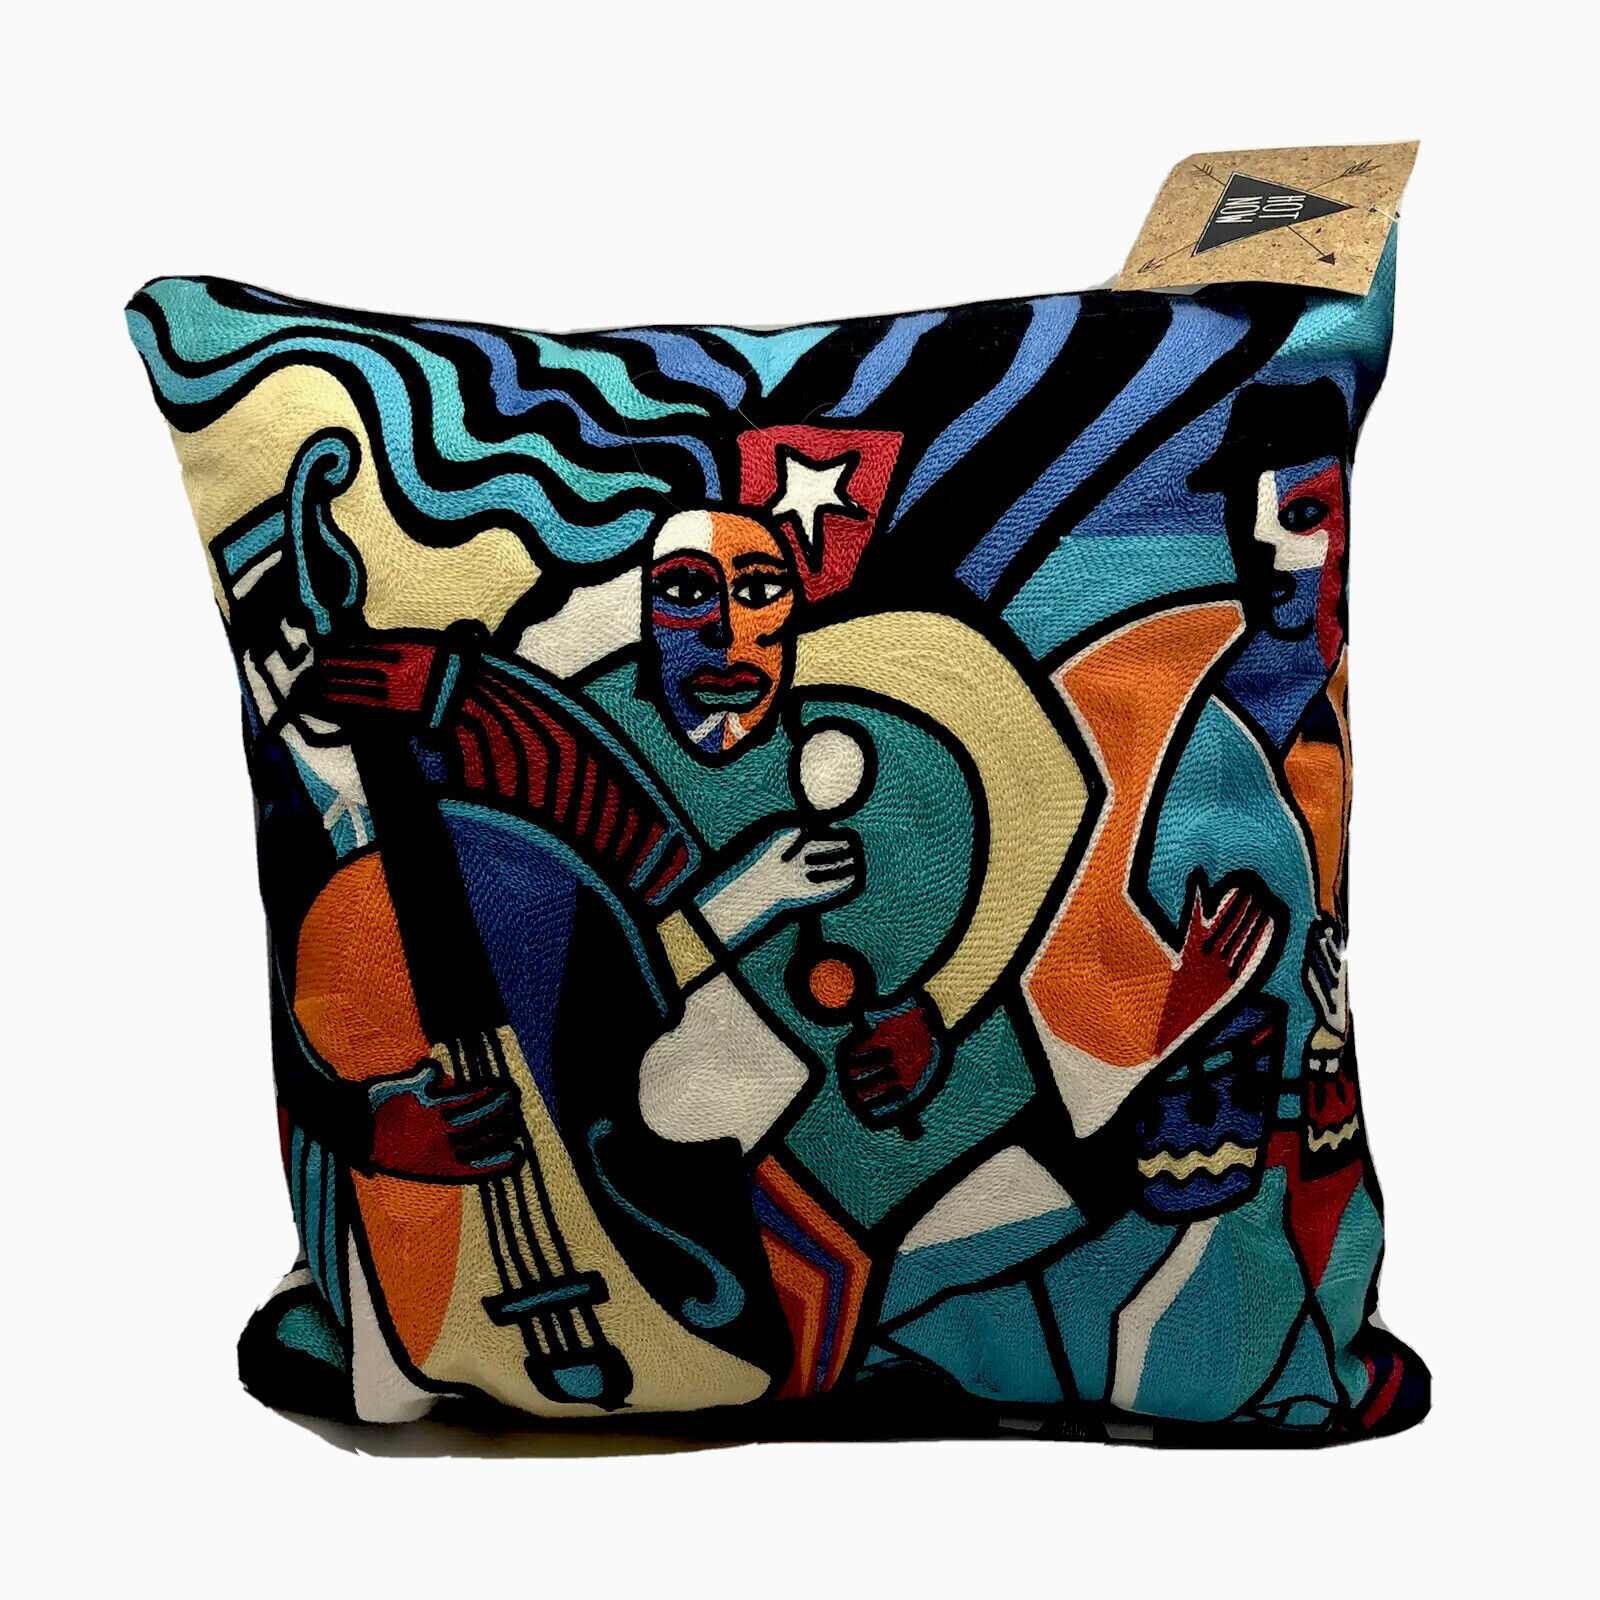 The Musicians Jazz Pillow 16x16 Decorative Picasso style Needlepoint Nice Hot Now